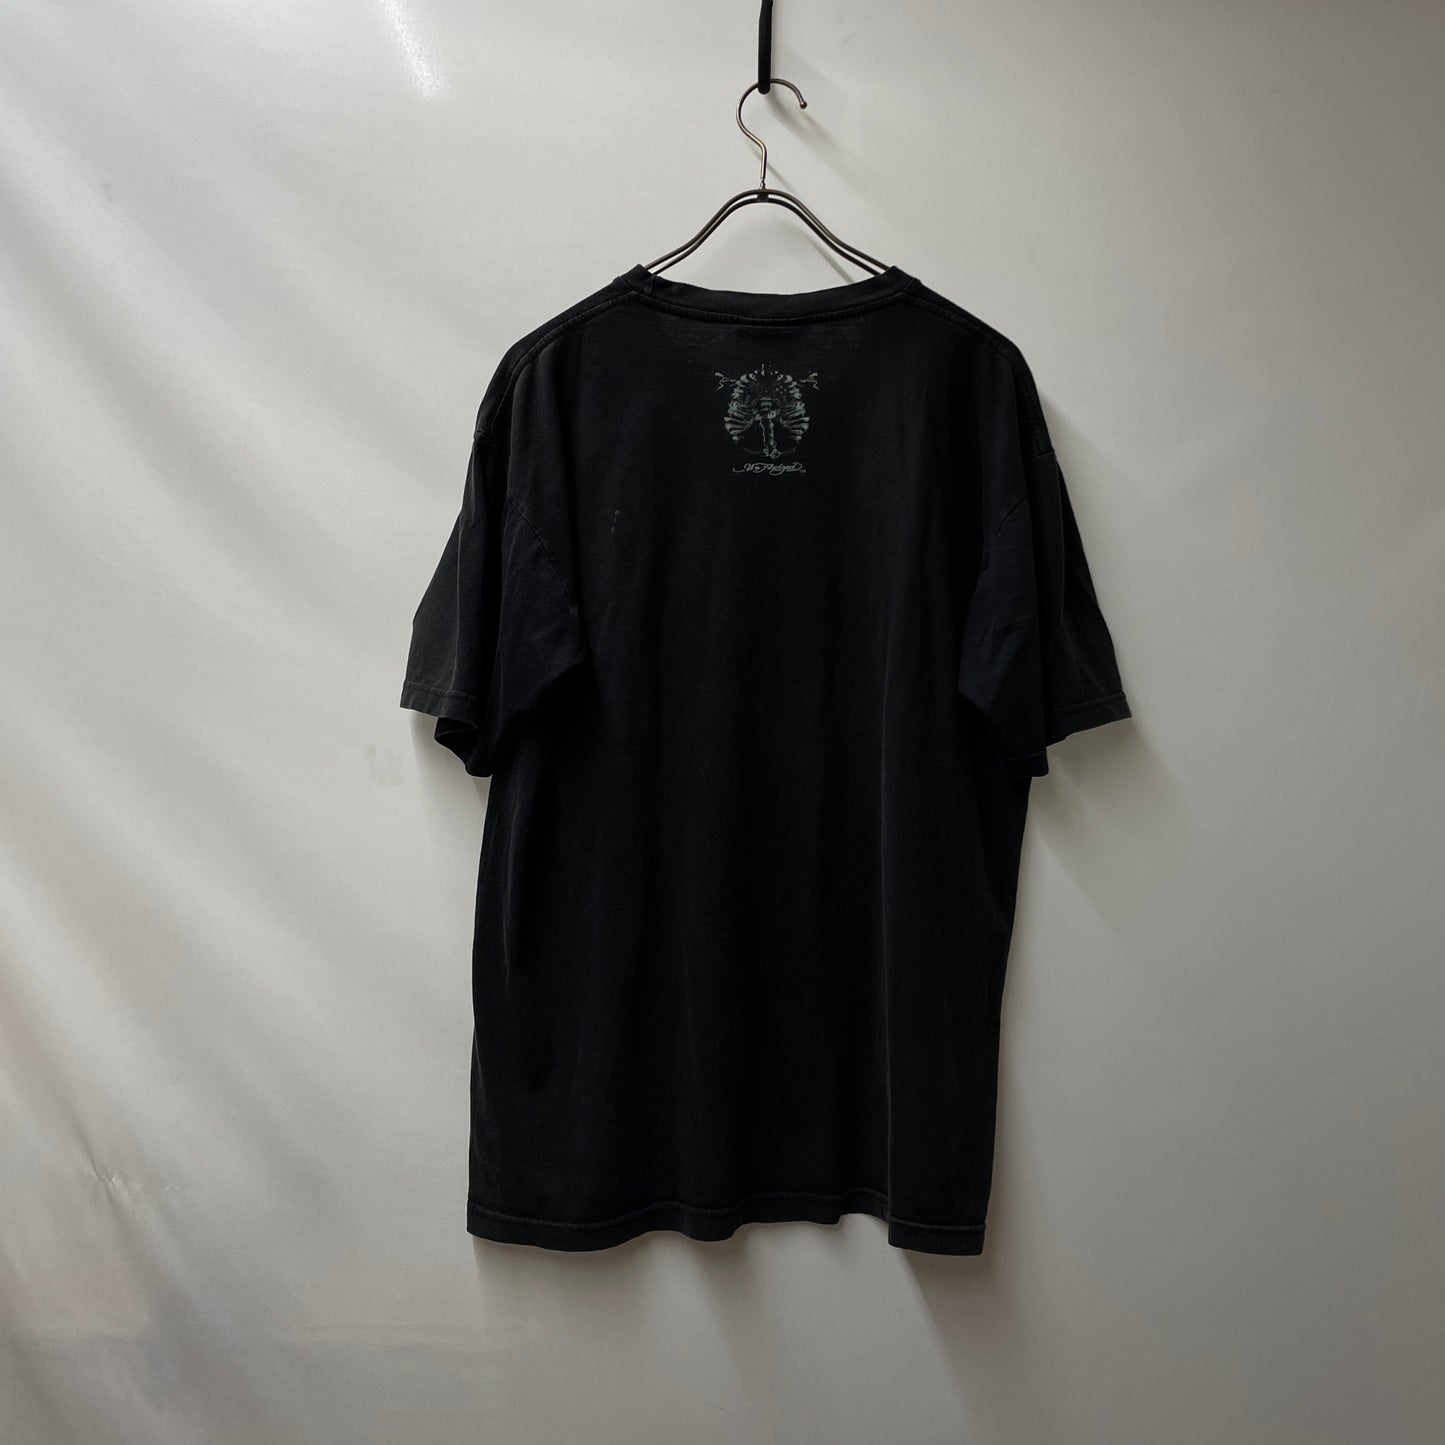 game Tee PS2コントローラー　レントゲンT　Tシャツ